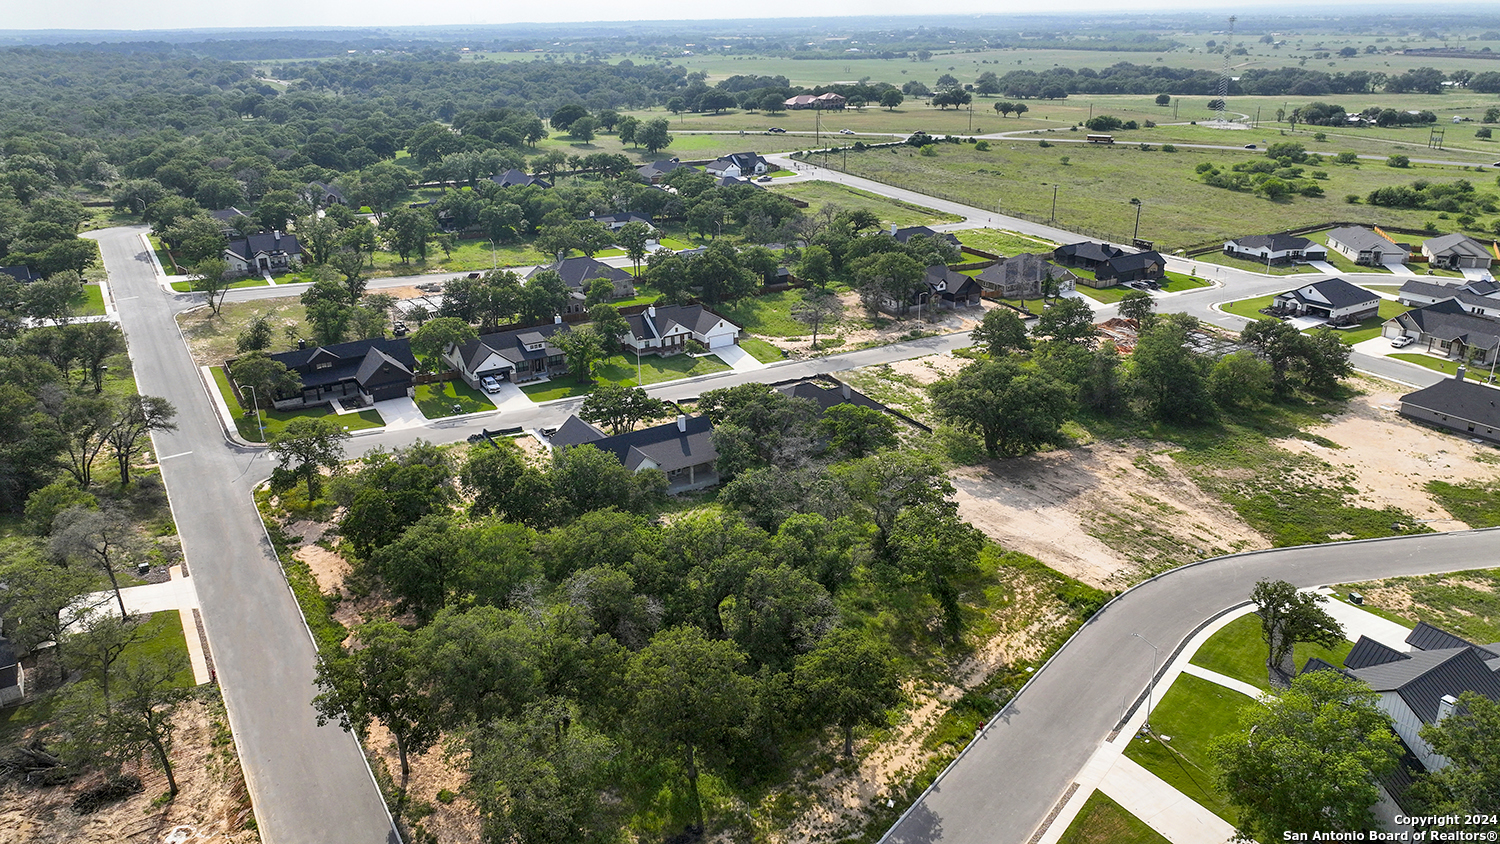 an aerial view of river residential houses with outdoor space and trees